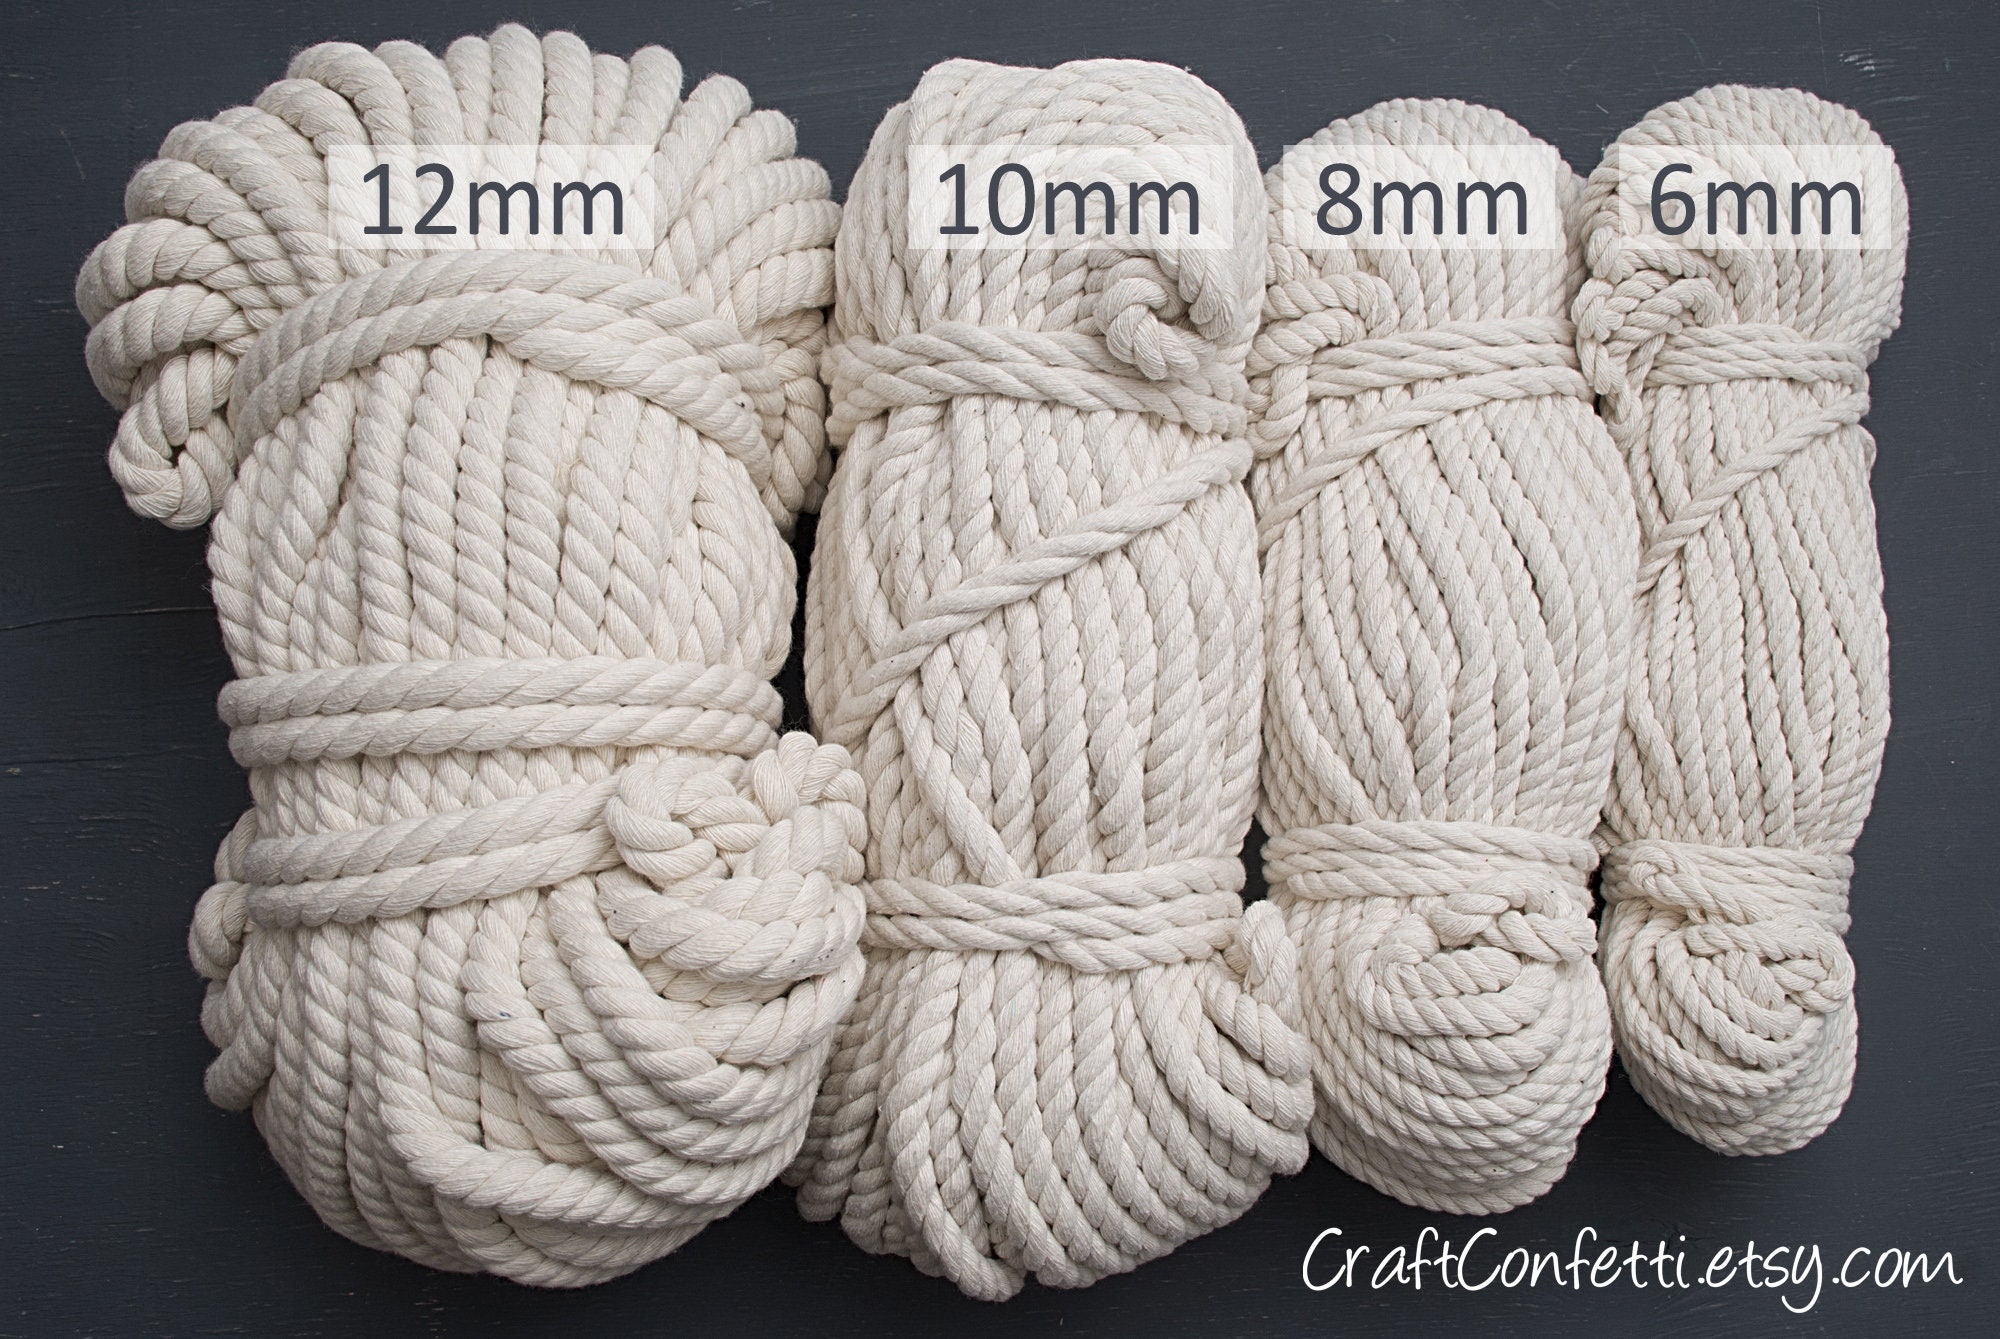 14mm Nautical Rope 5tards, Beige Cotton Rope, Natural Color Cord Twisted  Thick Rope Decoration Rope Craft Supplies Nautical Decor / 5yd4.6m -   Israel